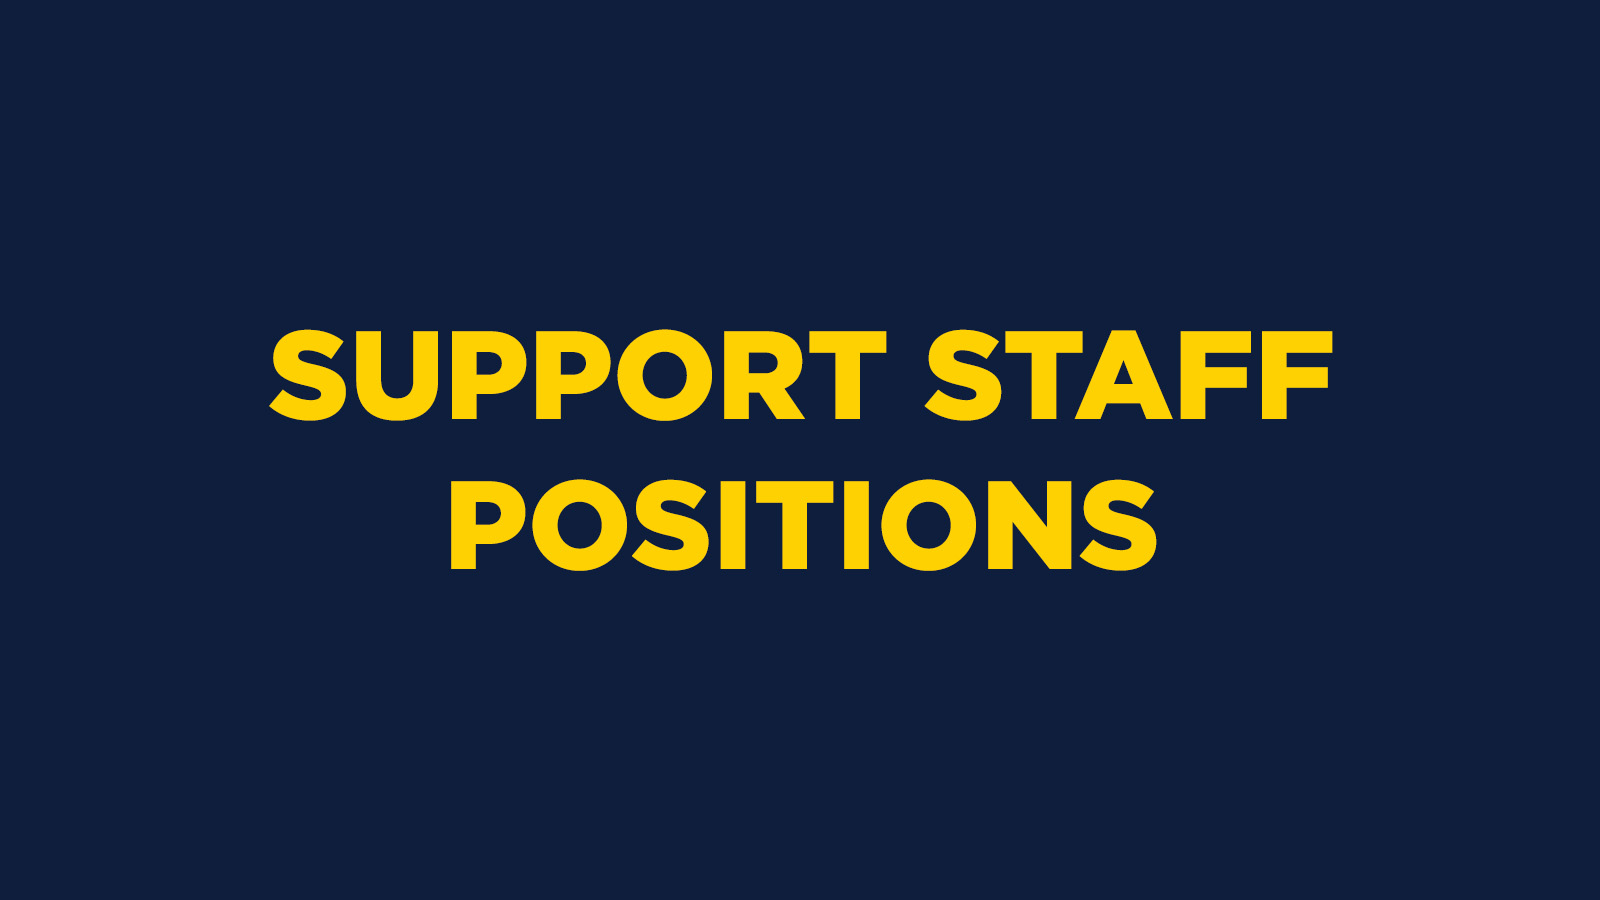 SUPPORT STAFF POSITIONS